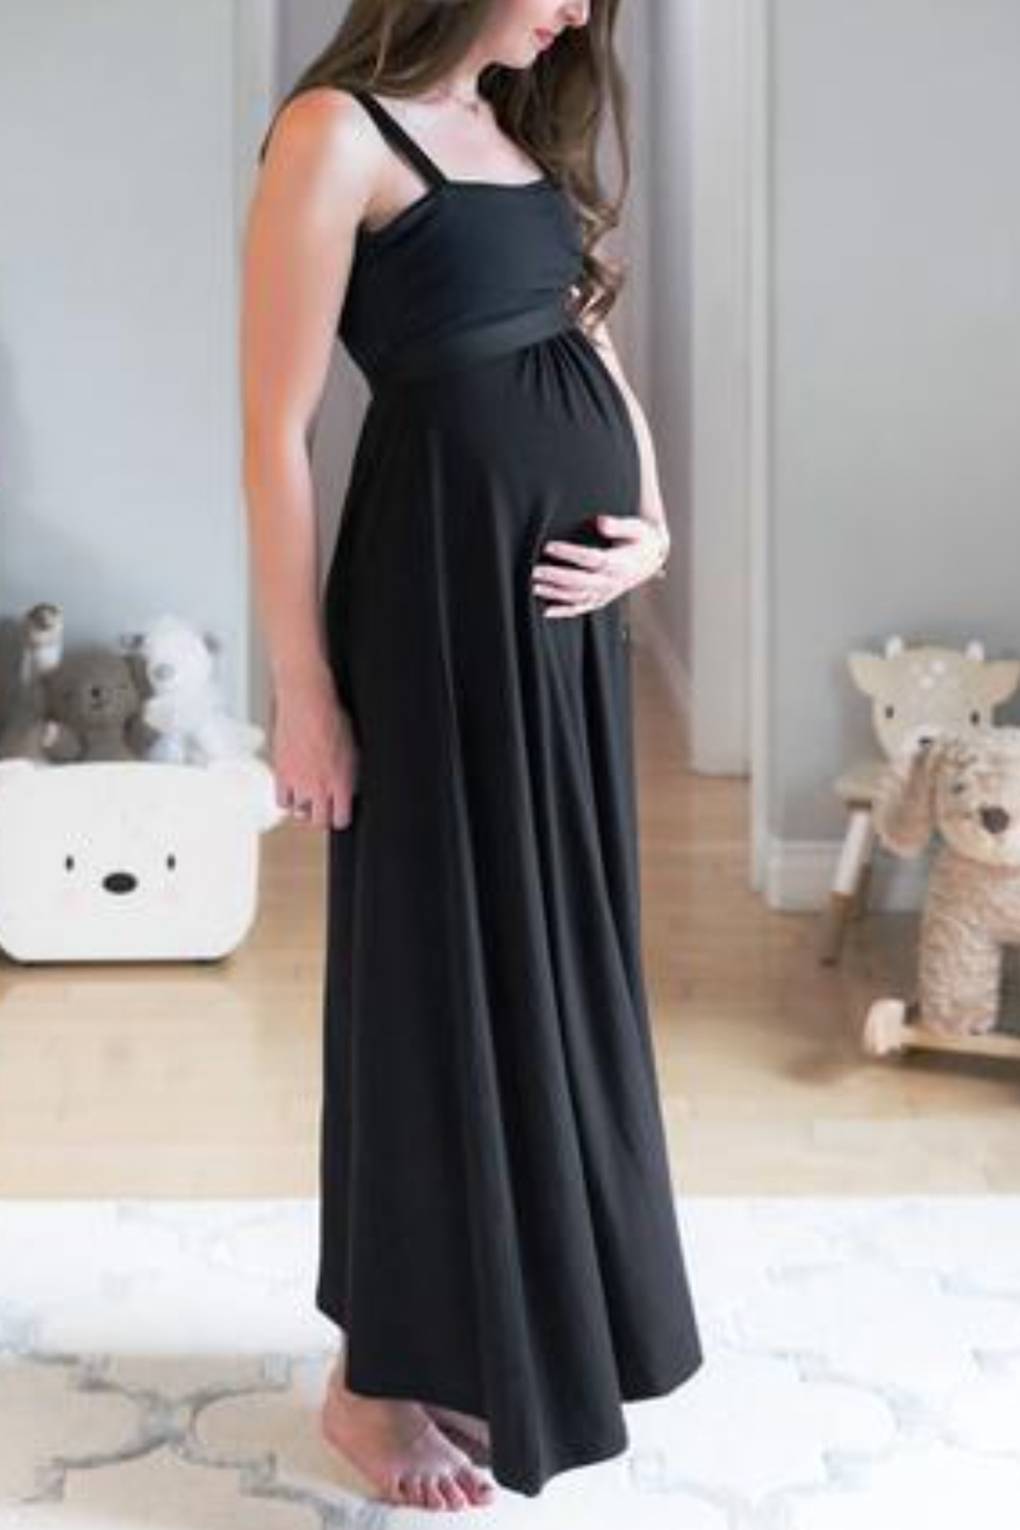 Best Maternity Clothes & Maternity Brands To Wear Throughout Your ...